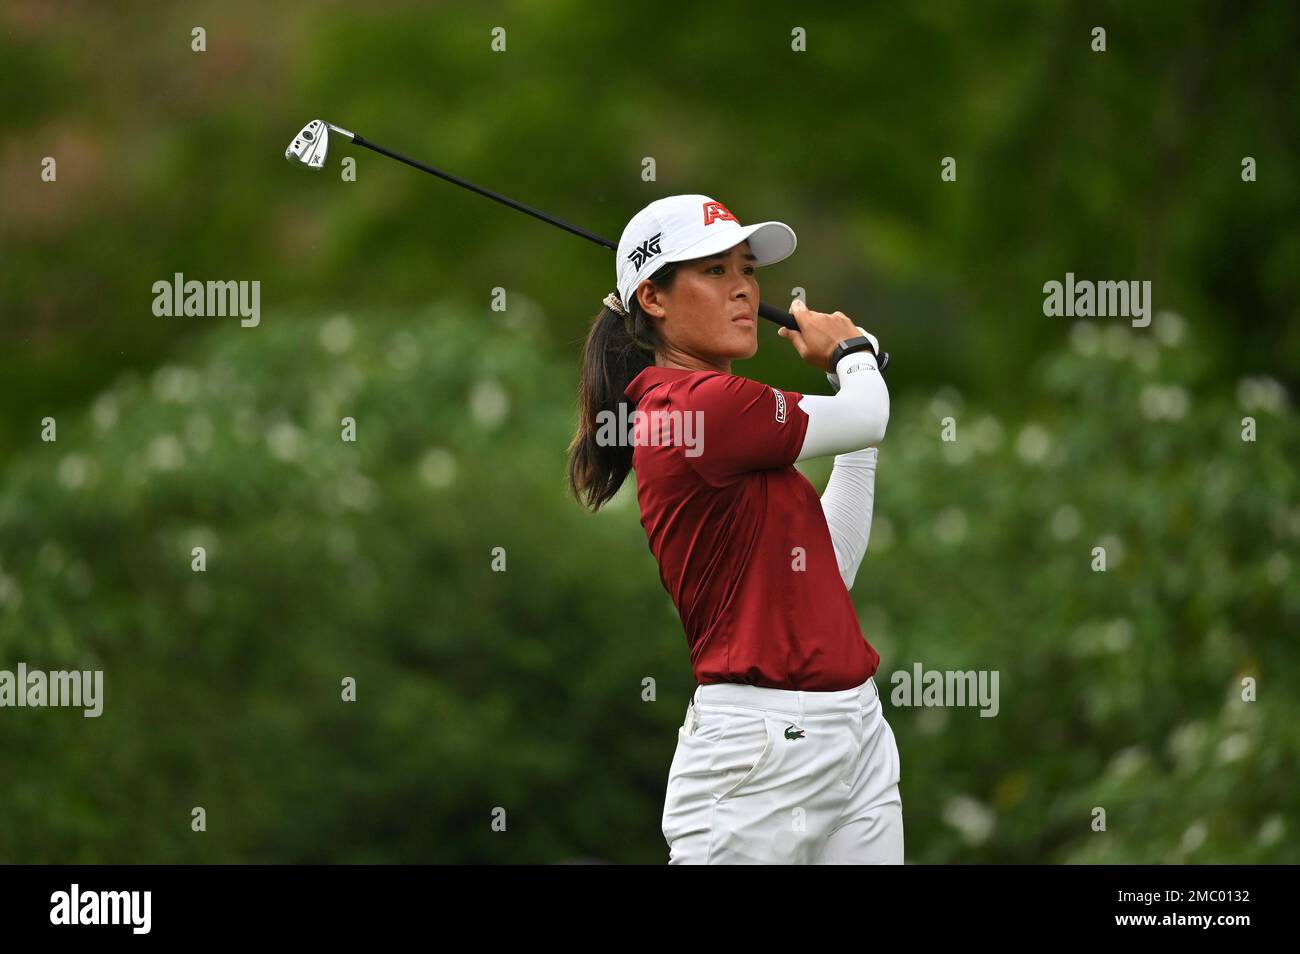 Celine Boutier of France watches her shot on the 12th hole during the final round of the LPGA Honda Thailand golf tournament in Pattaya, southern Thailand, Sunday, March 13, 2022